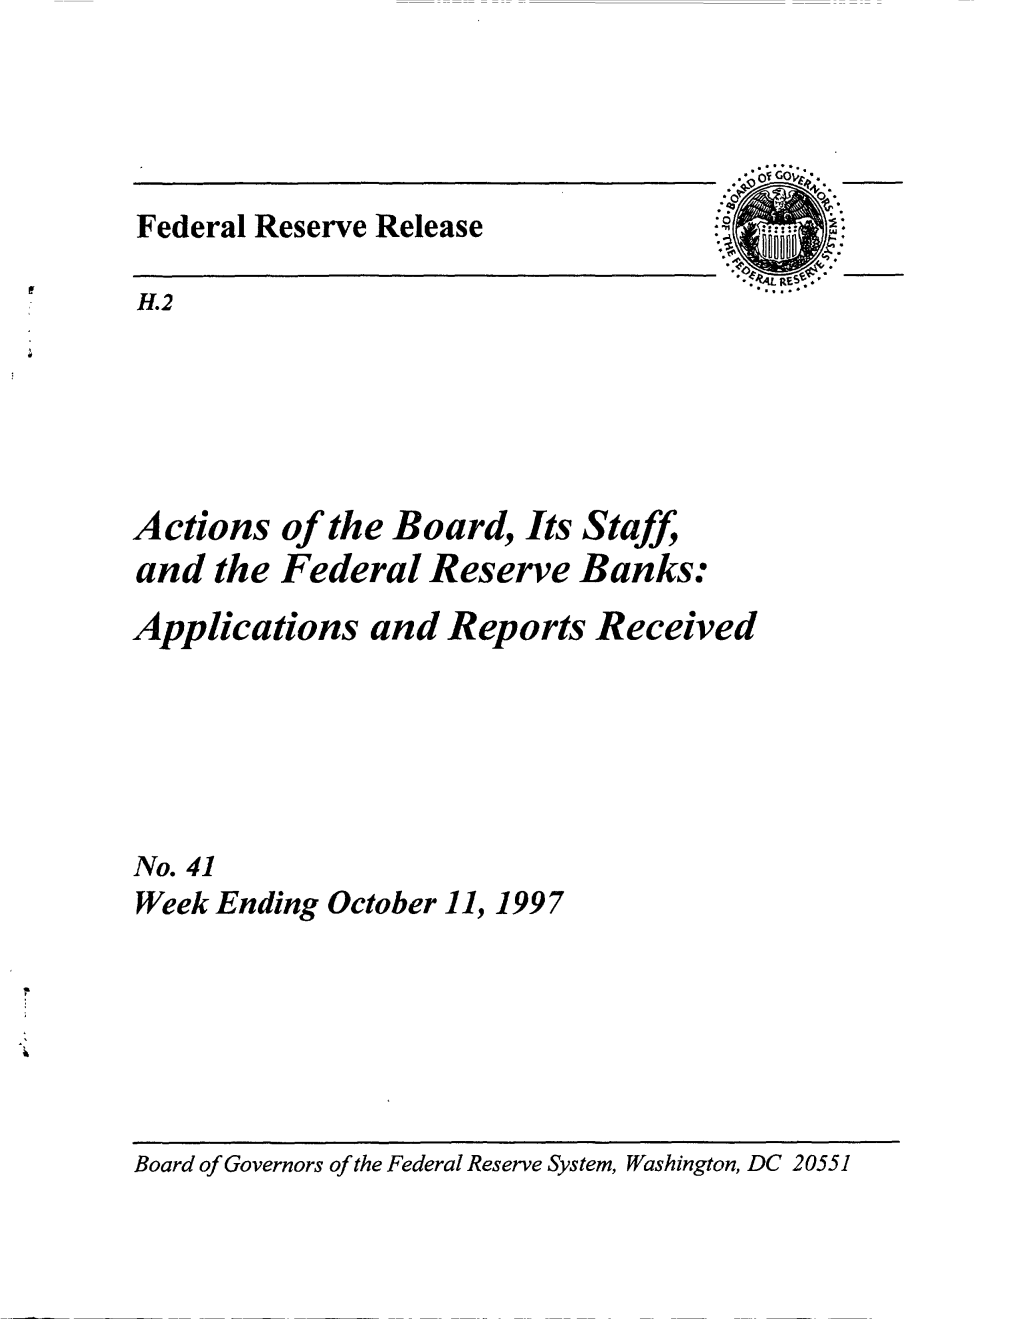 Actions Ofthe Board, Its Staff, and the Federal Reserve Banks: Applications and Reports Received